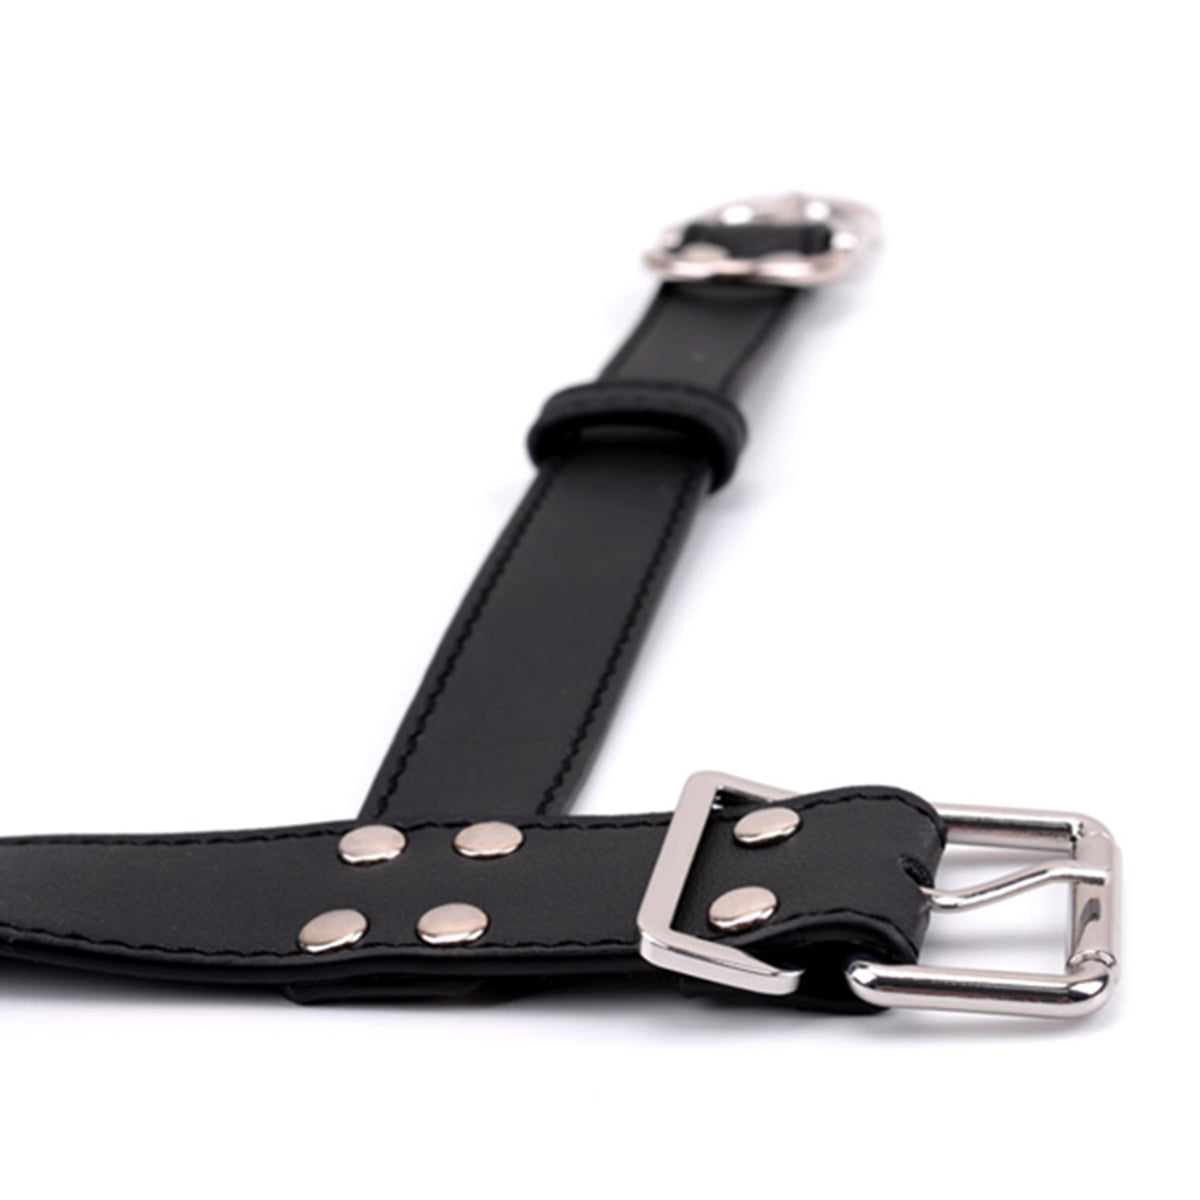 Slave Bondage Leather Neck to Wrist Back Restraint Collar with Handcuffs